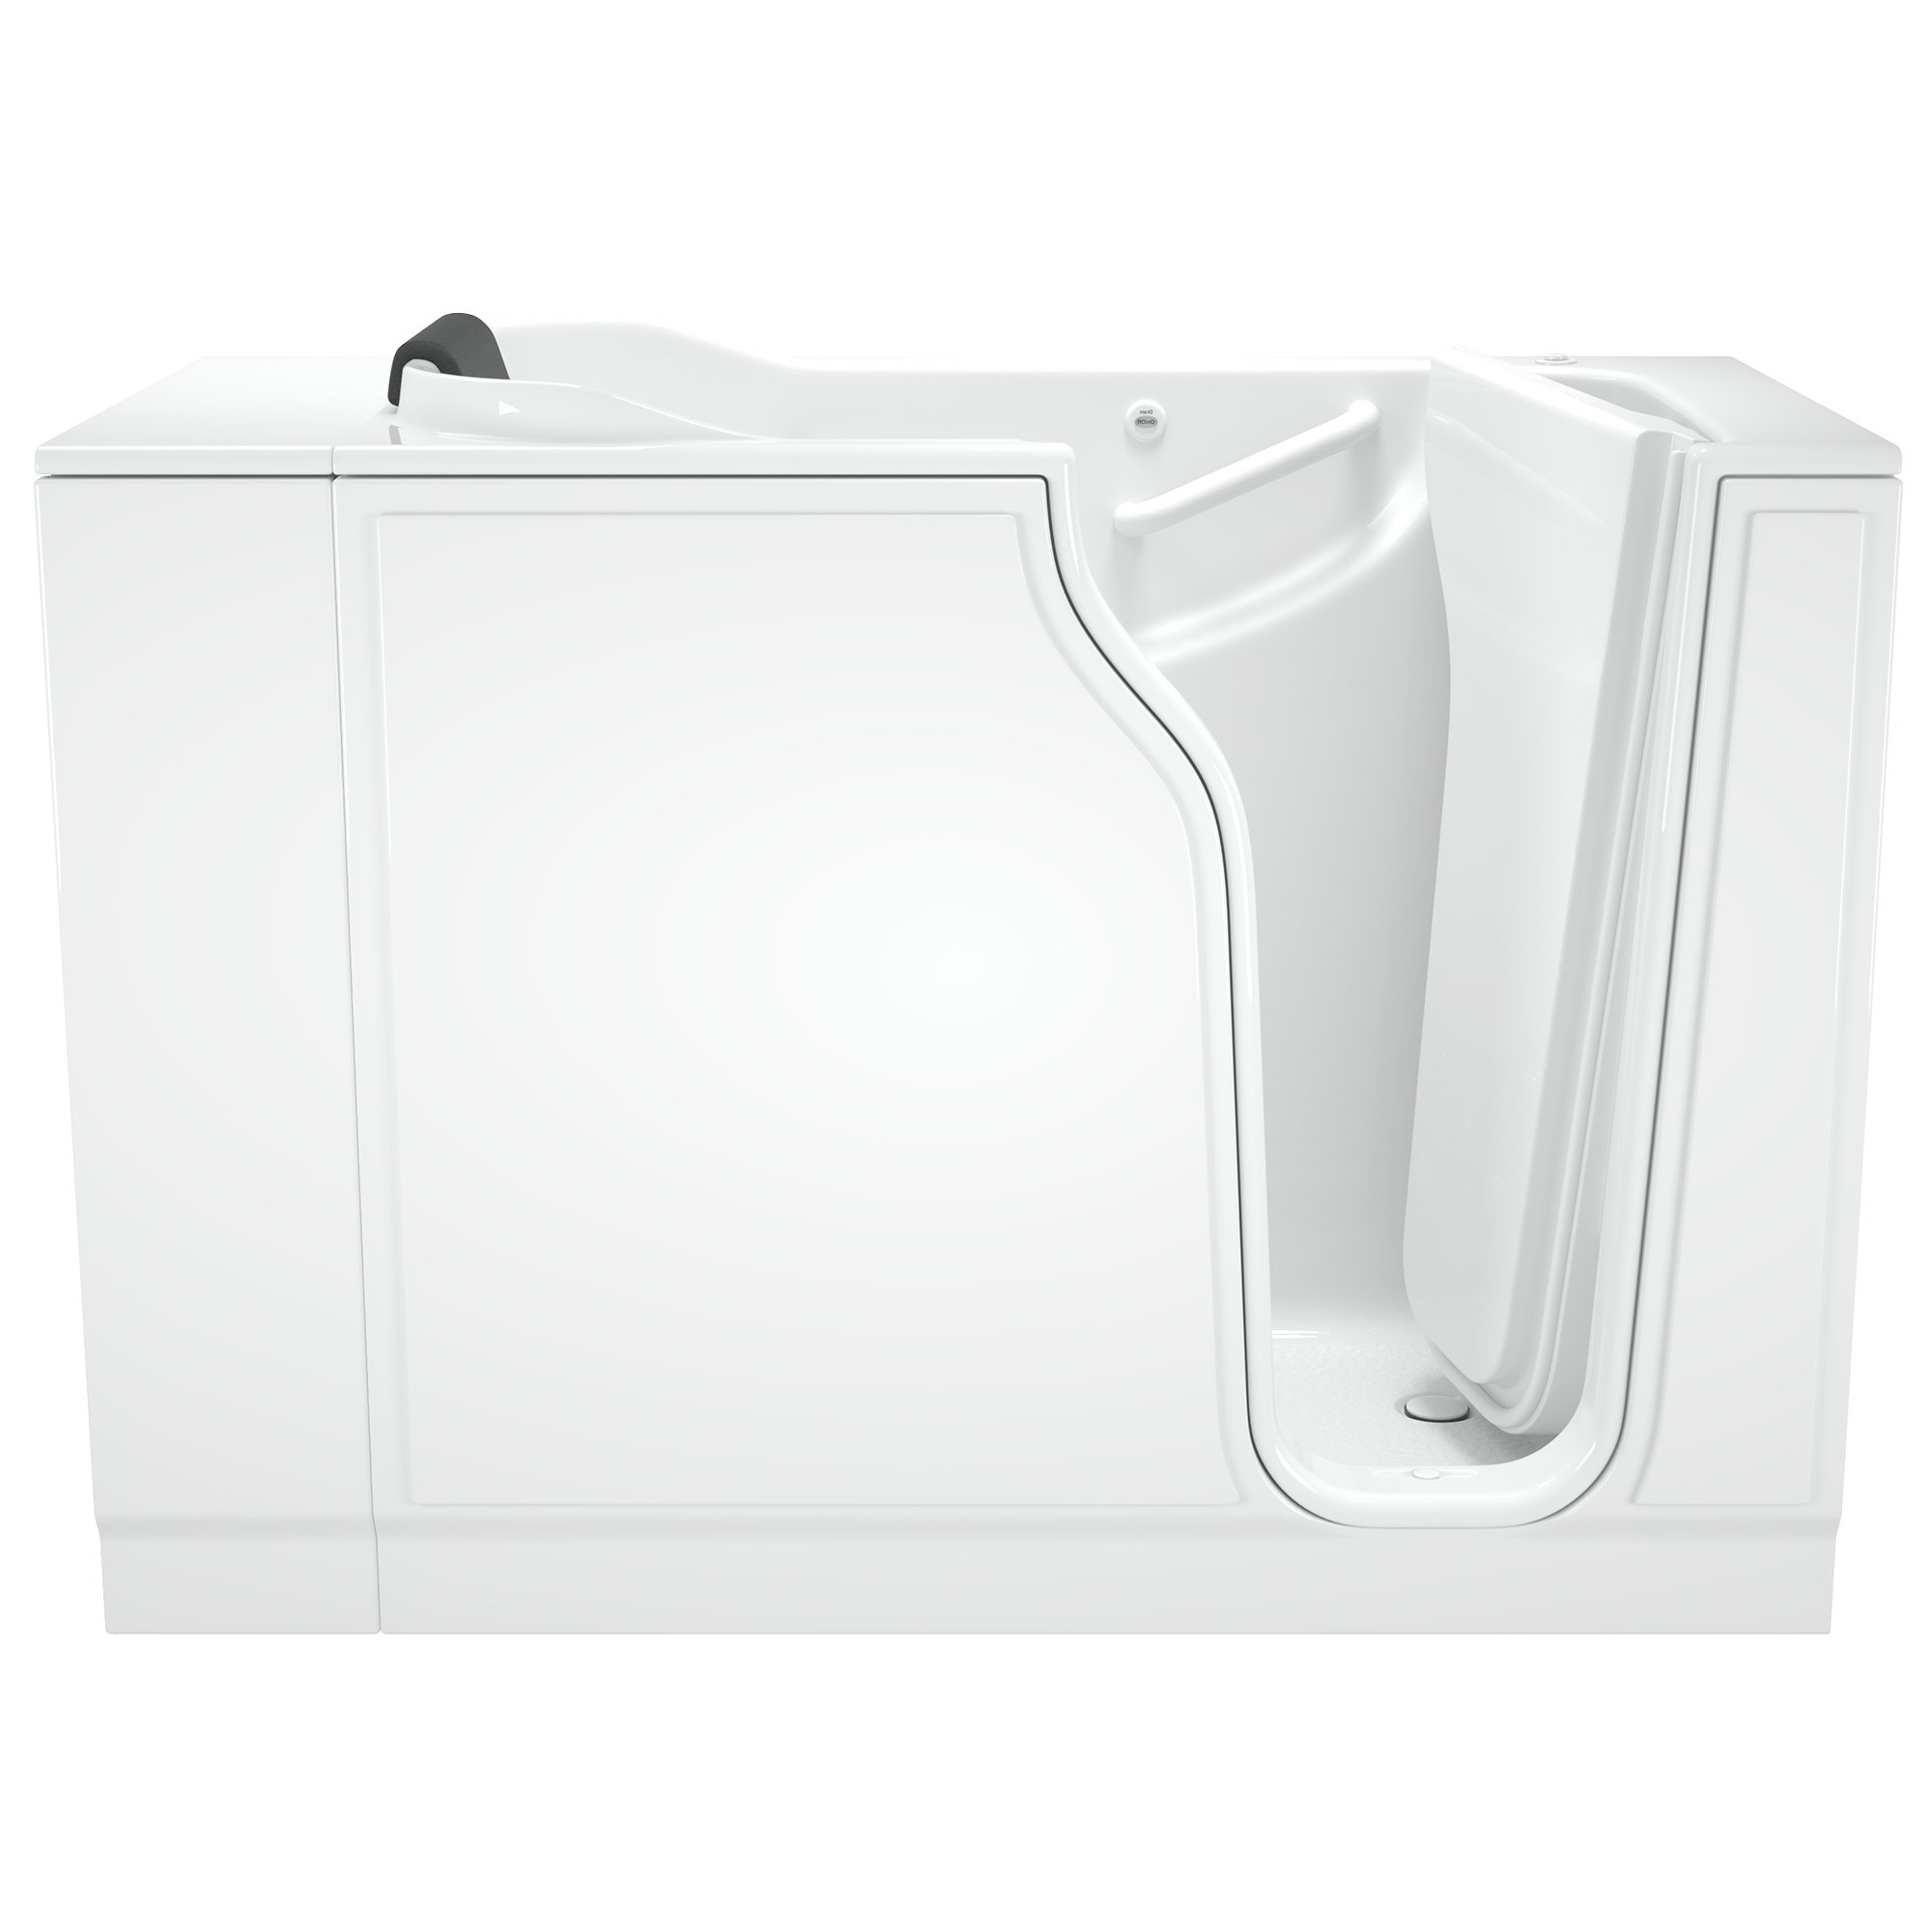 Gelcoat Premium Series 30 x 52 -Inch Walk-in Tub With Whirlpool System - Right-Hand Drain